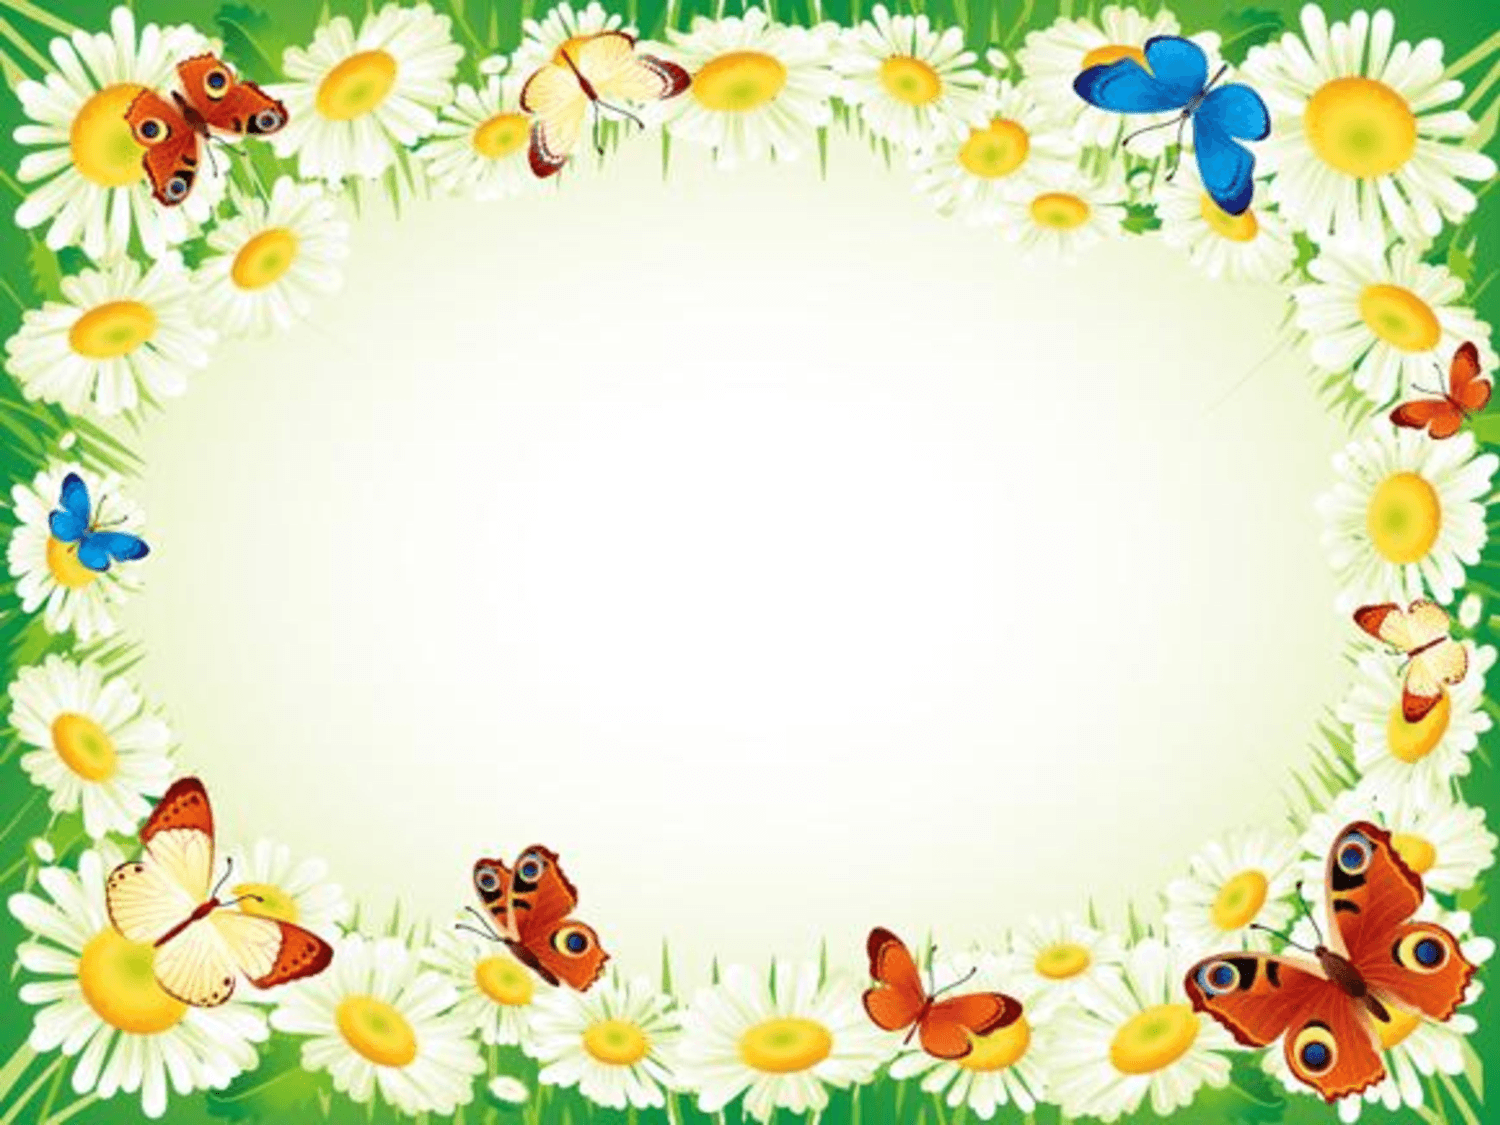 Nature Border Wallpaper and Background. Hmyz. Borders